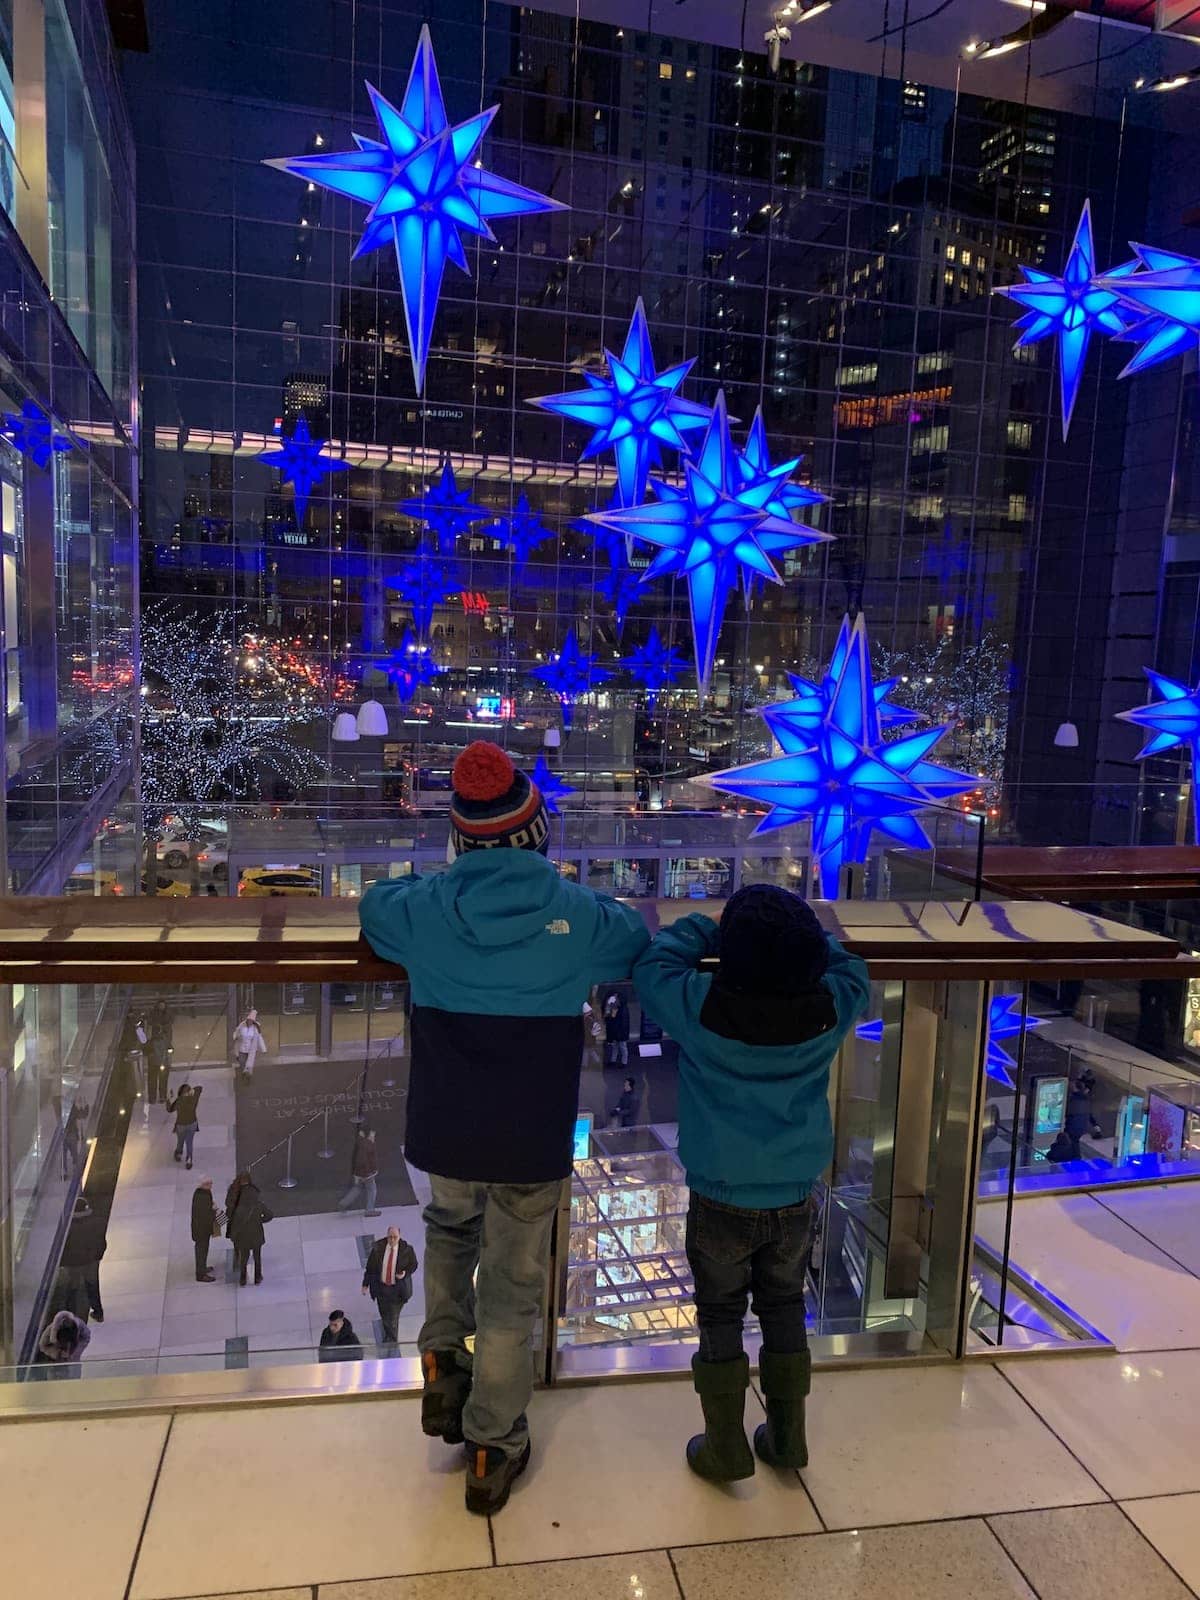 Blake and Porter overlooking the mall